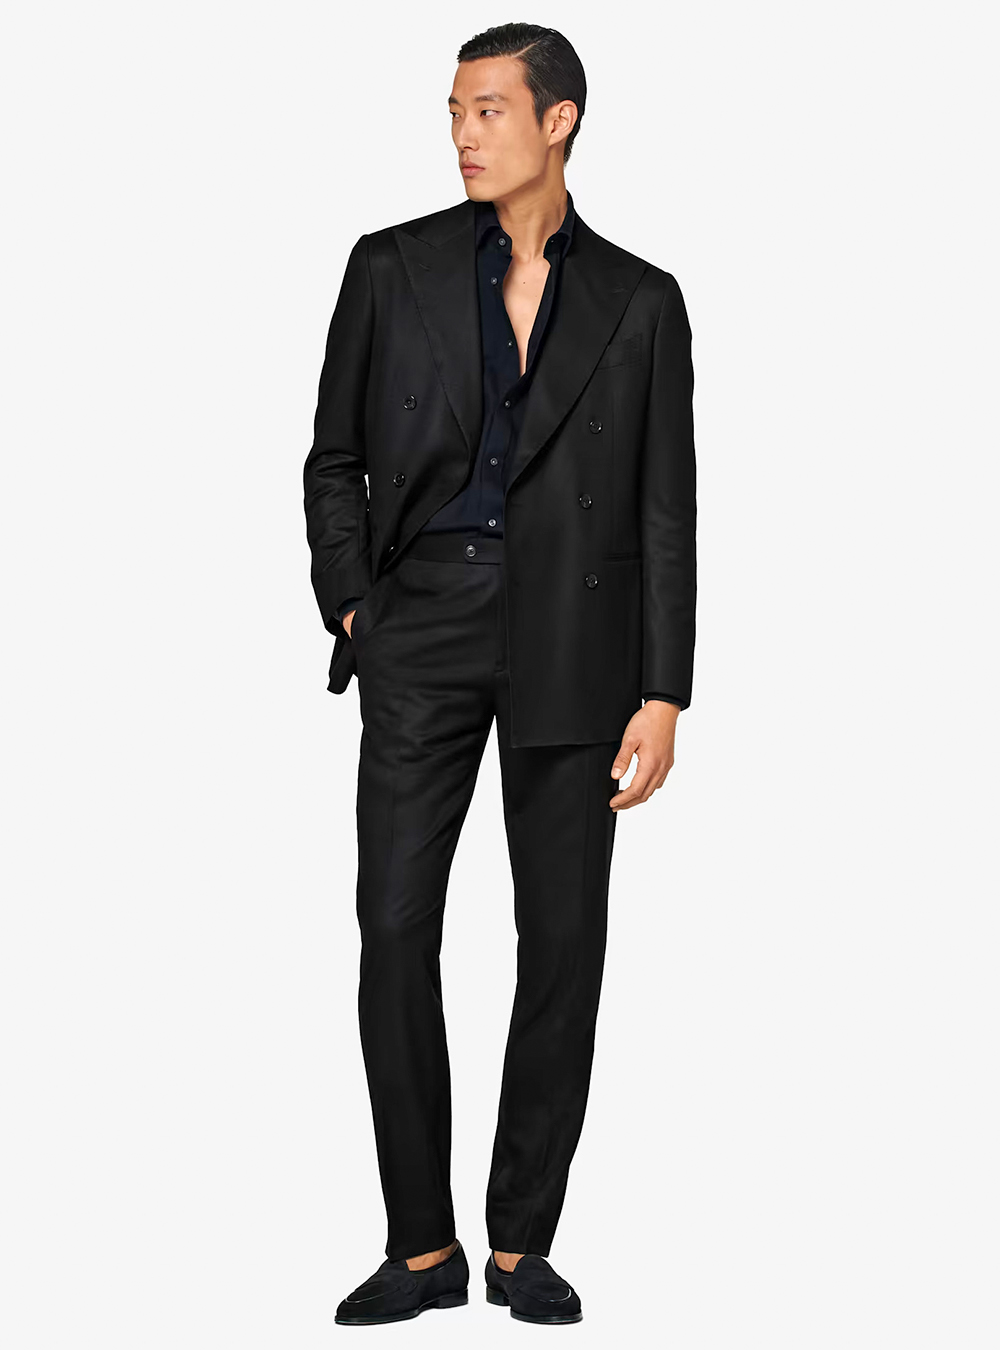 Black double-breasted suit, black dress shirt and black loafers